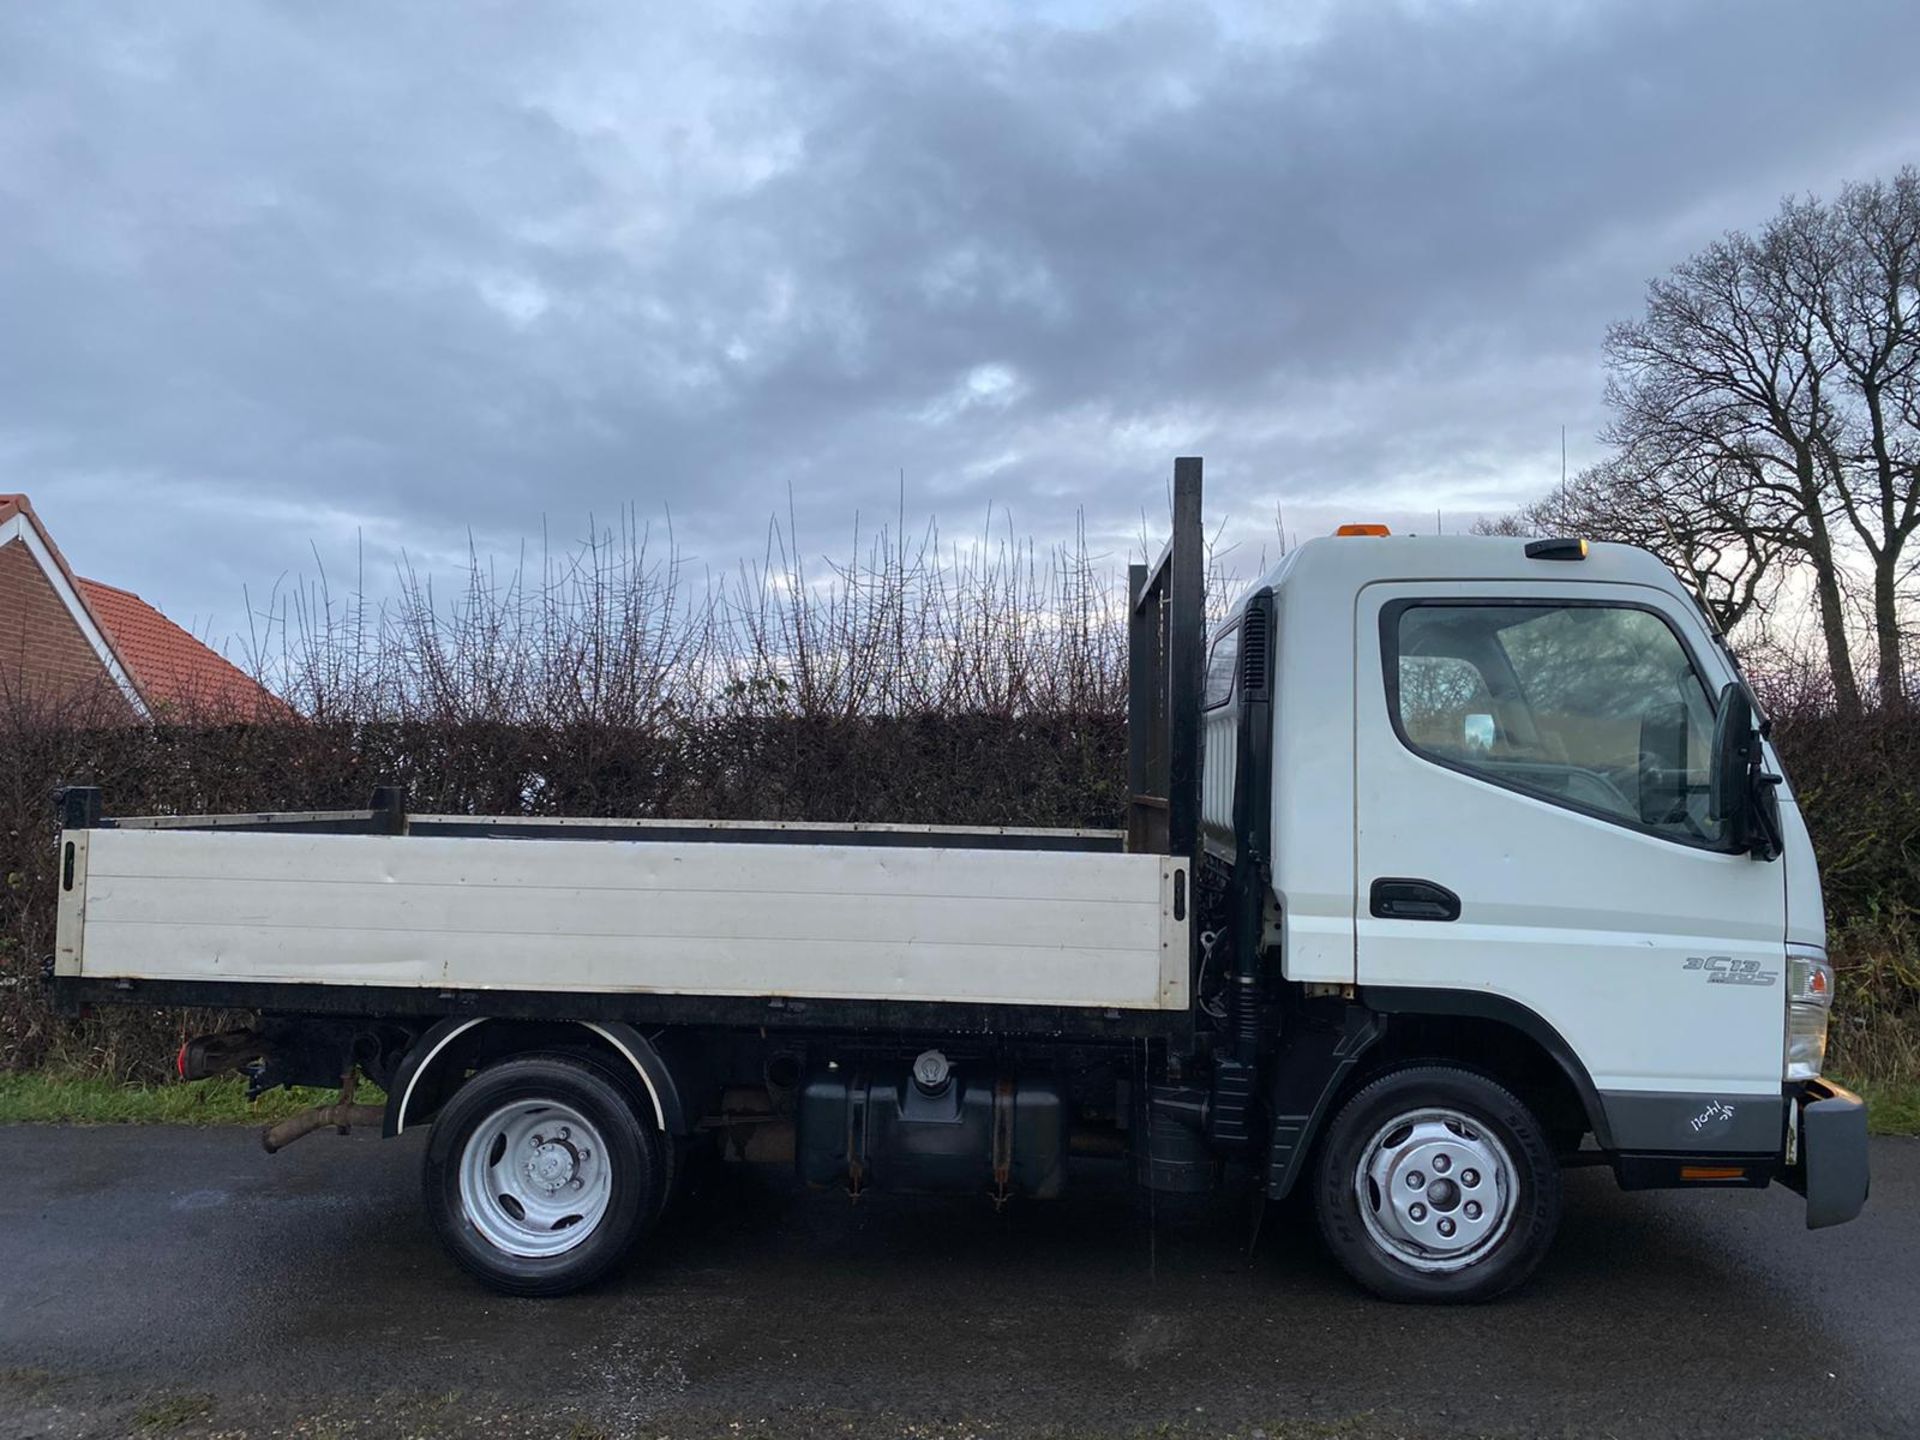 2012/12 REG MITSUBISHI FUSO CANTER 3C13-25 SWB 3.0 DIESEL WHITE TIPPER, SHOWING 0 FORMER KEEPERS - Image 8 of 10